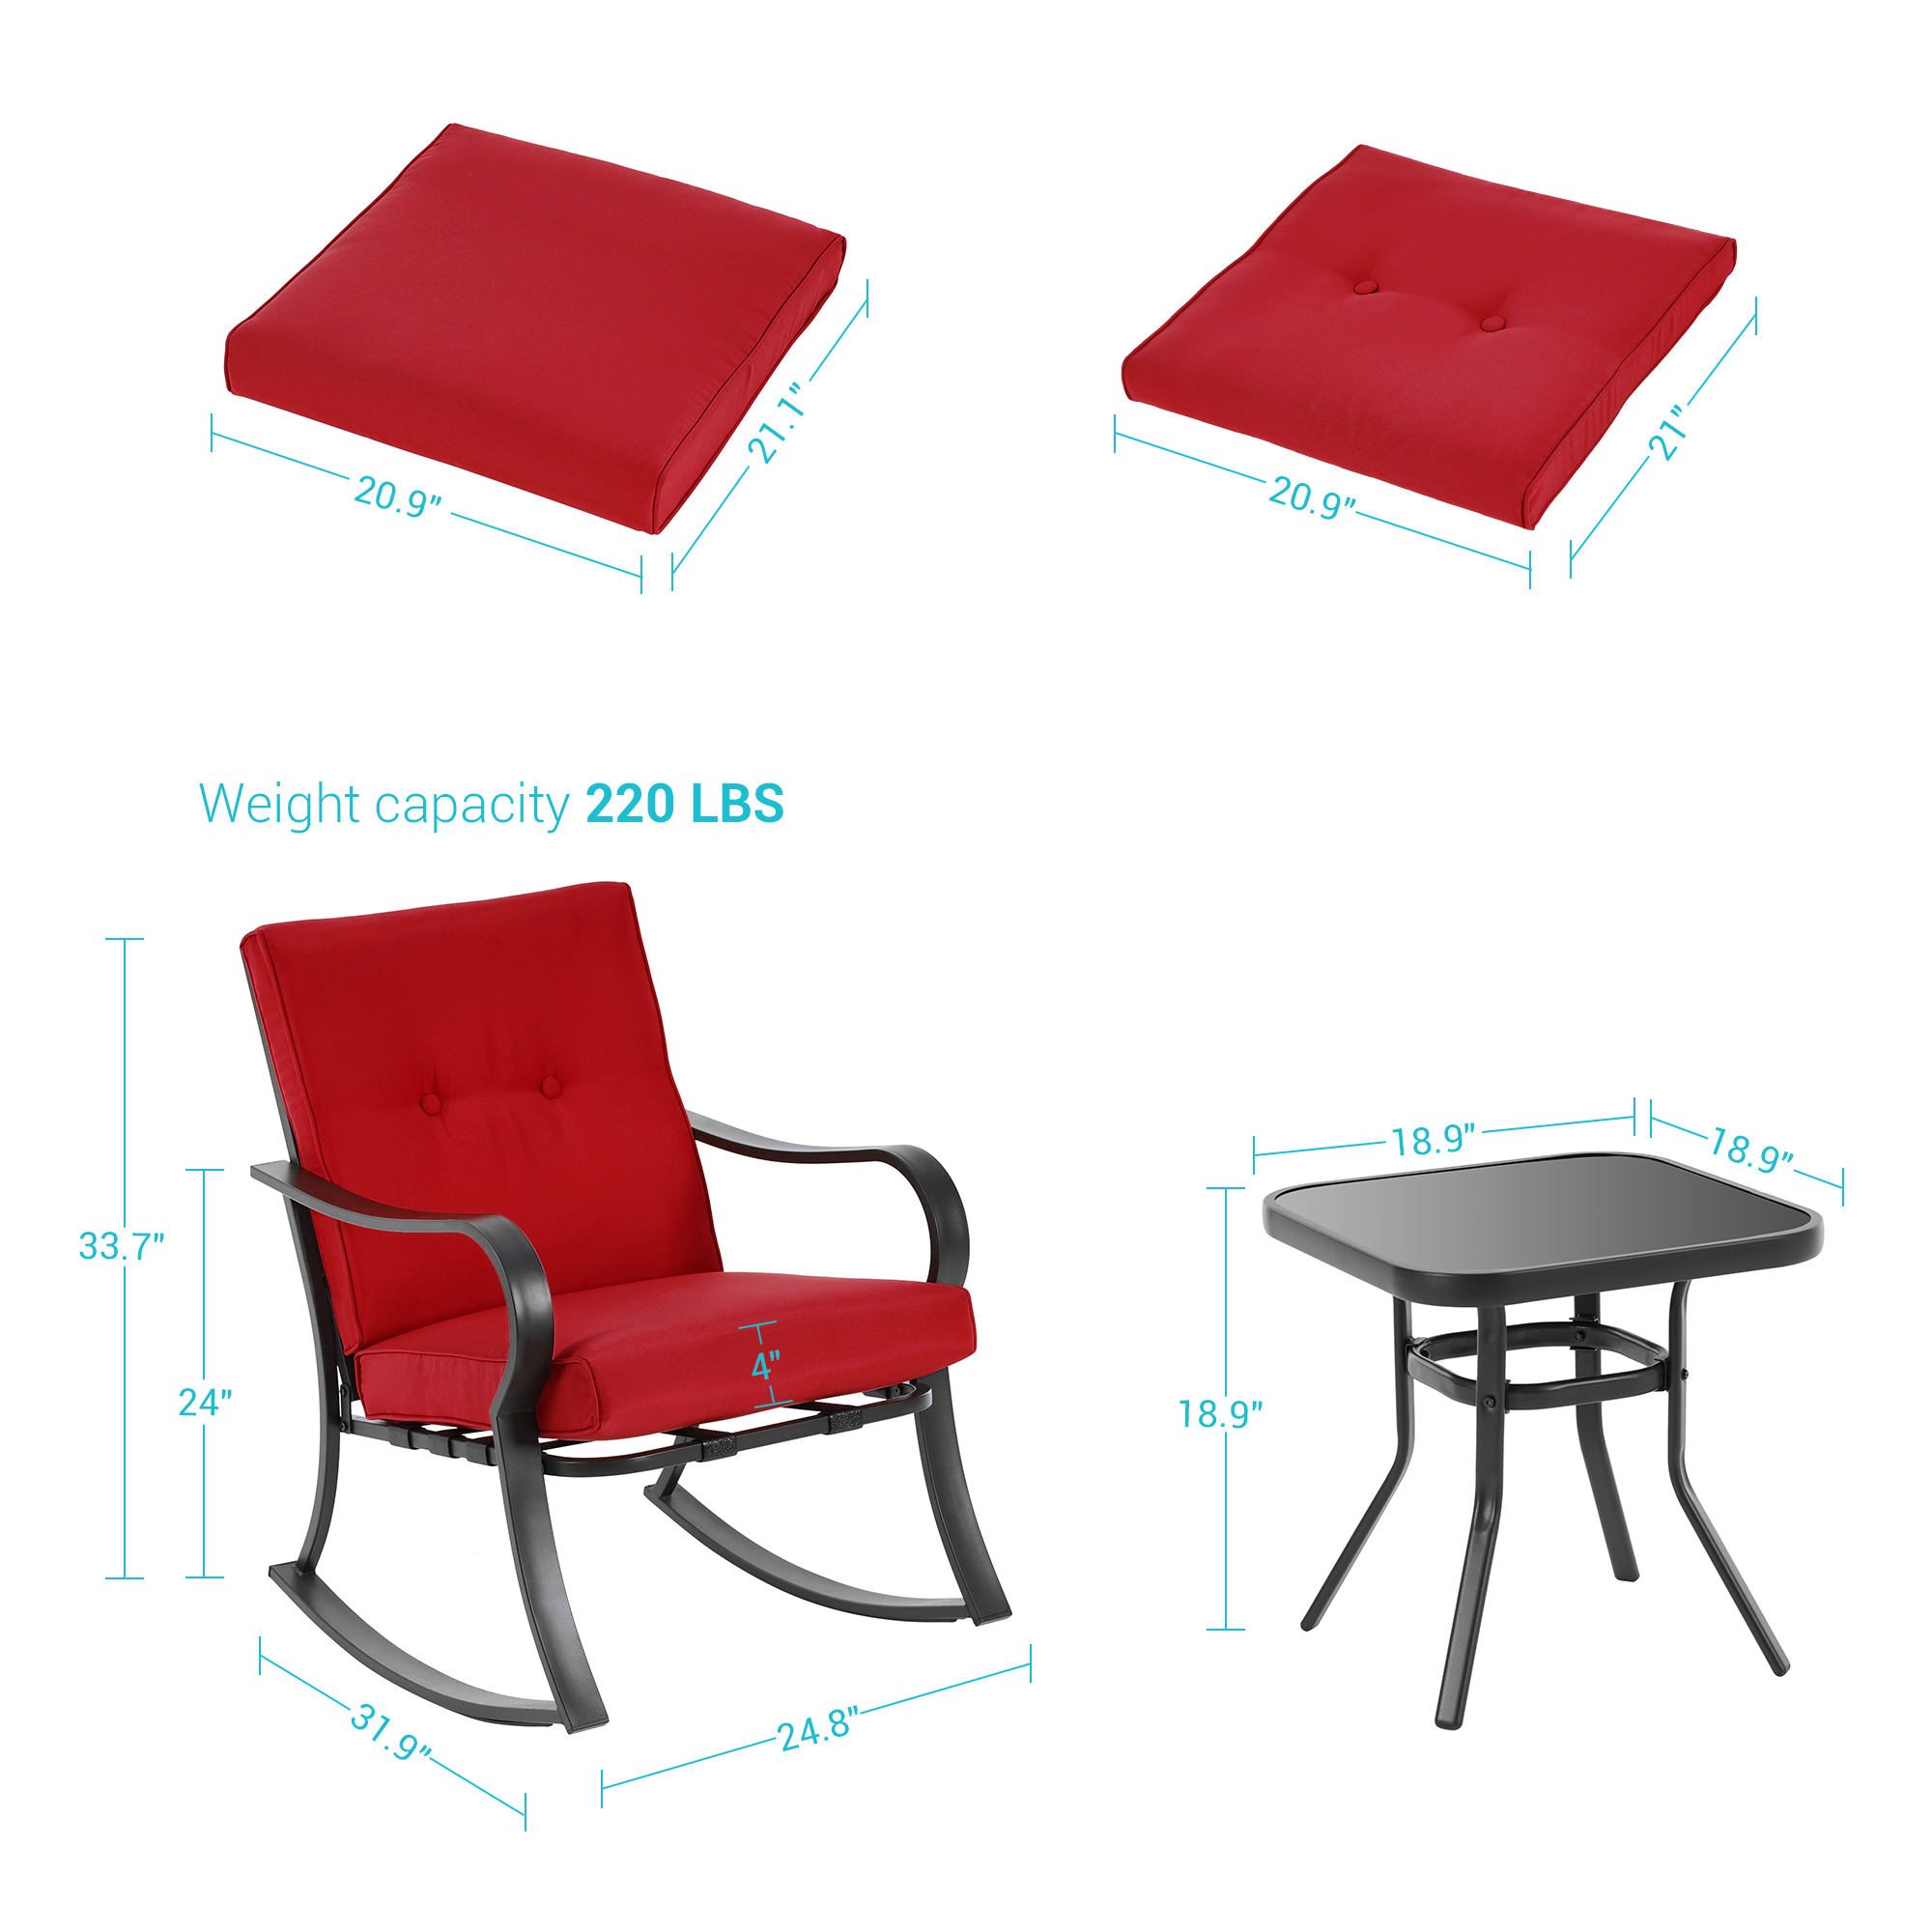 CHYVARY 3 Pcs Outdoor Patio Steel Lounge 2 Rocking Soft Chair Sets with Tempered Glass Table for Patio and Garden,Red - image 2 of 8